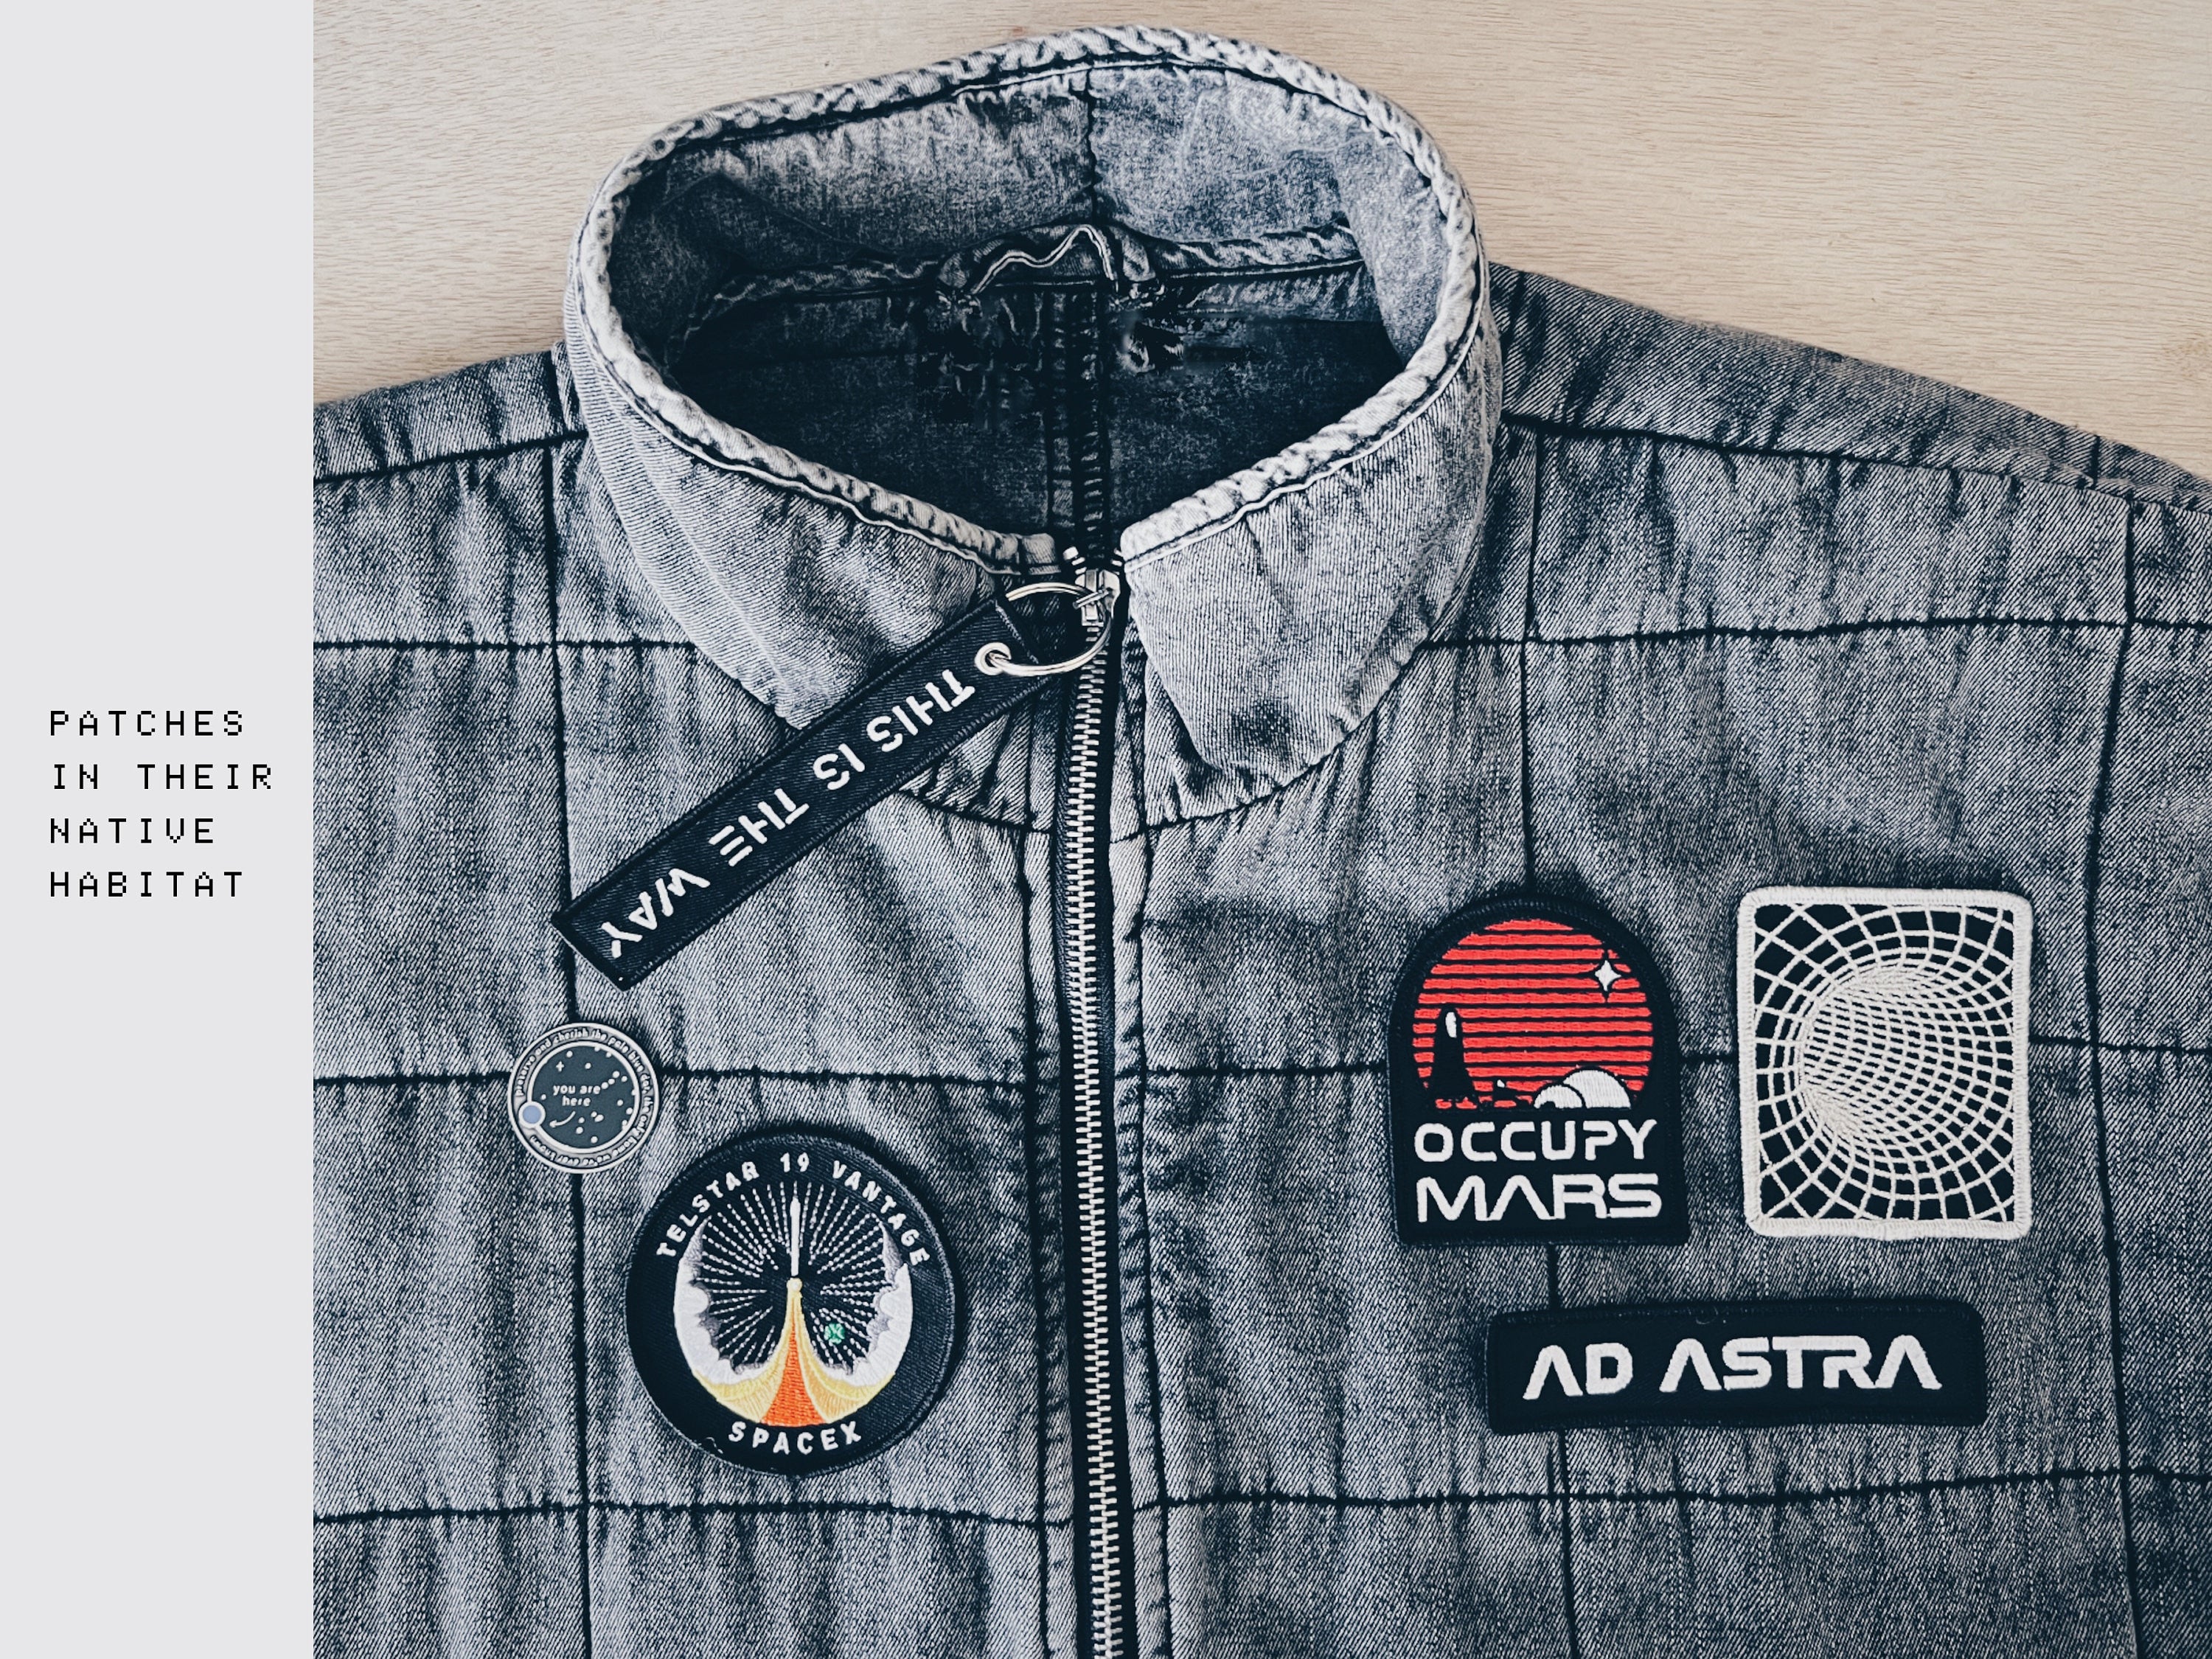 Event Horizon Embroidered Patch - EDC Mission Jacket Patches - Cyberpunk Space Patch